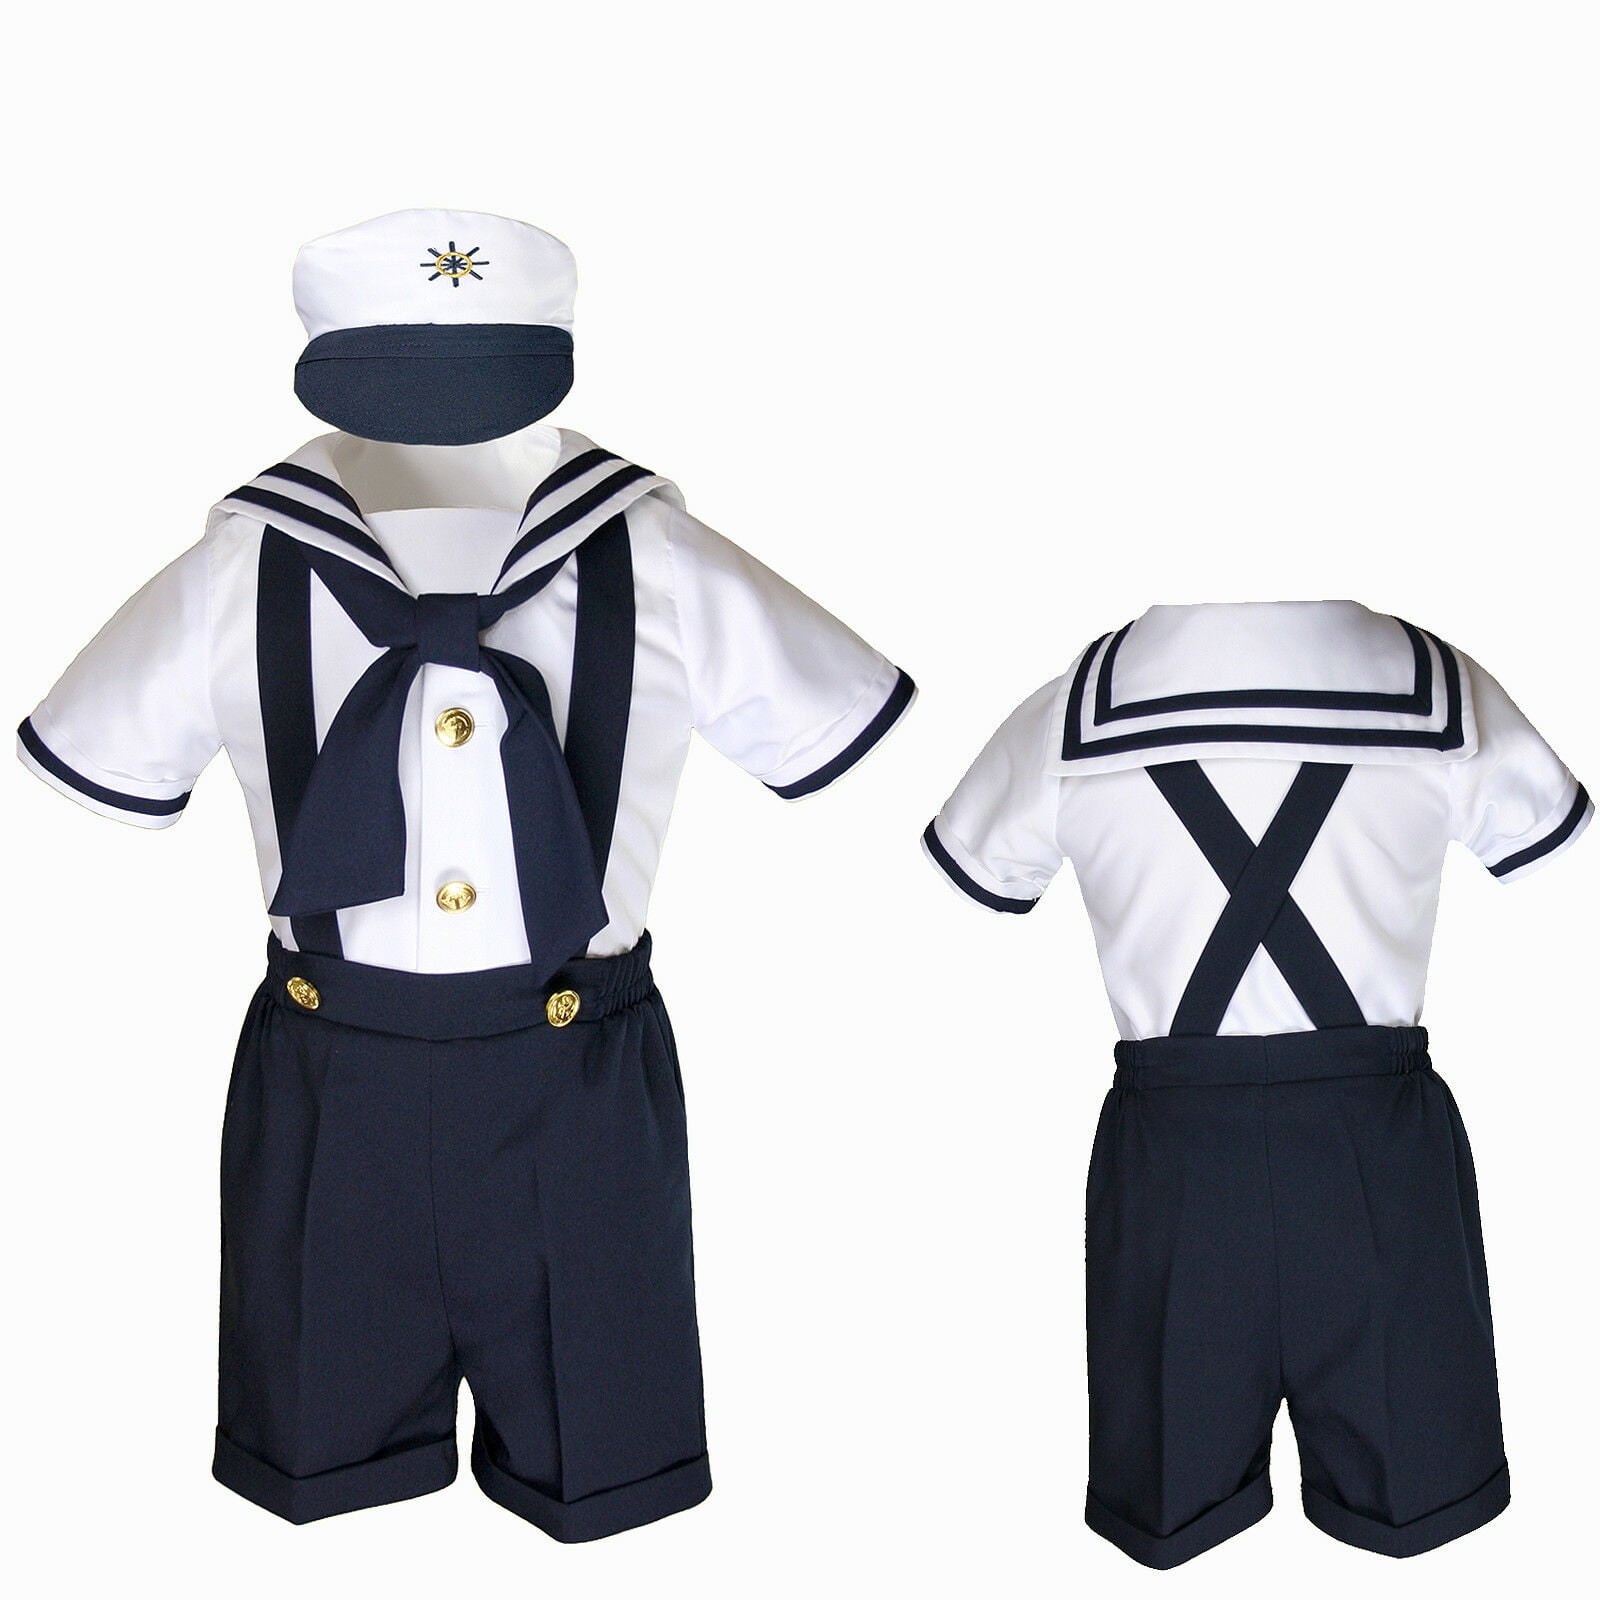 Infant Toddler Boy Navy White SAILOR Shorts Formal Suit Wedding Party Outfit  S-4 